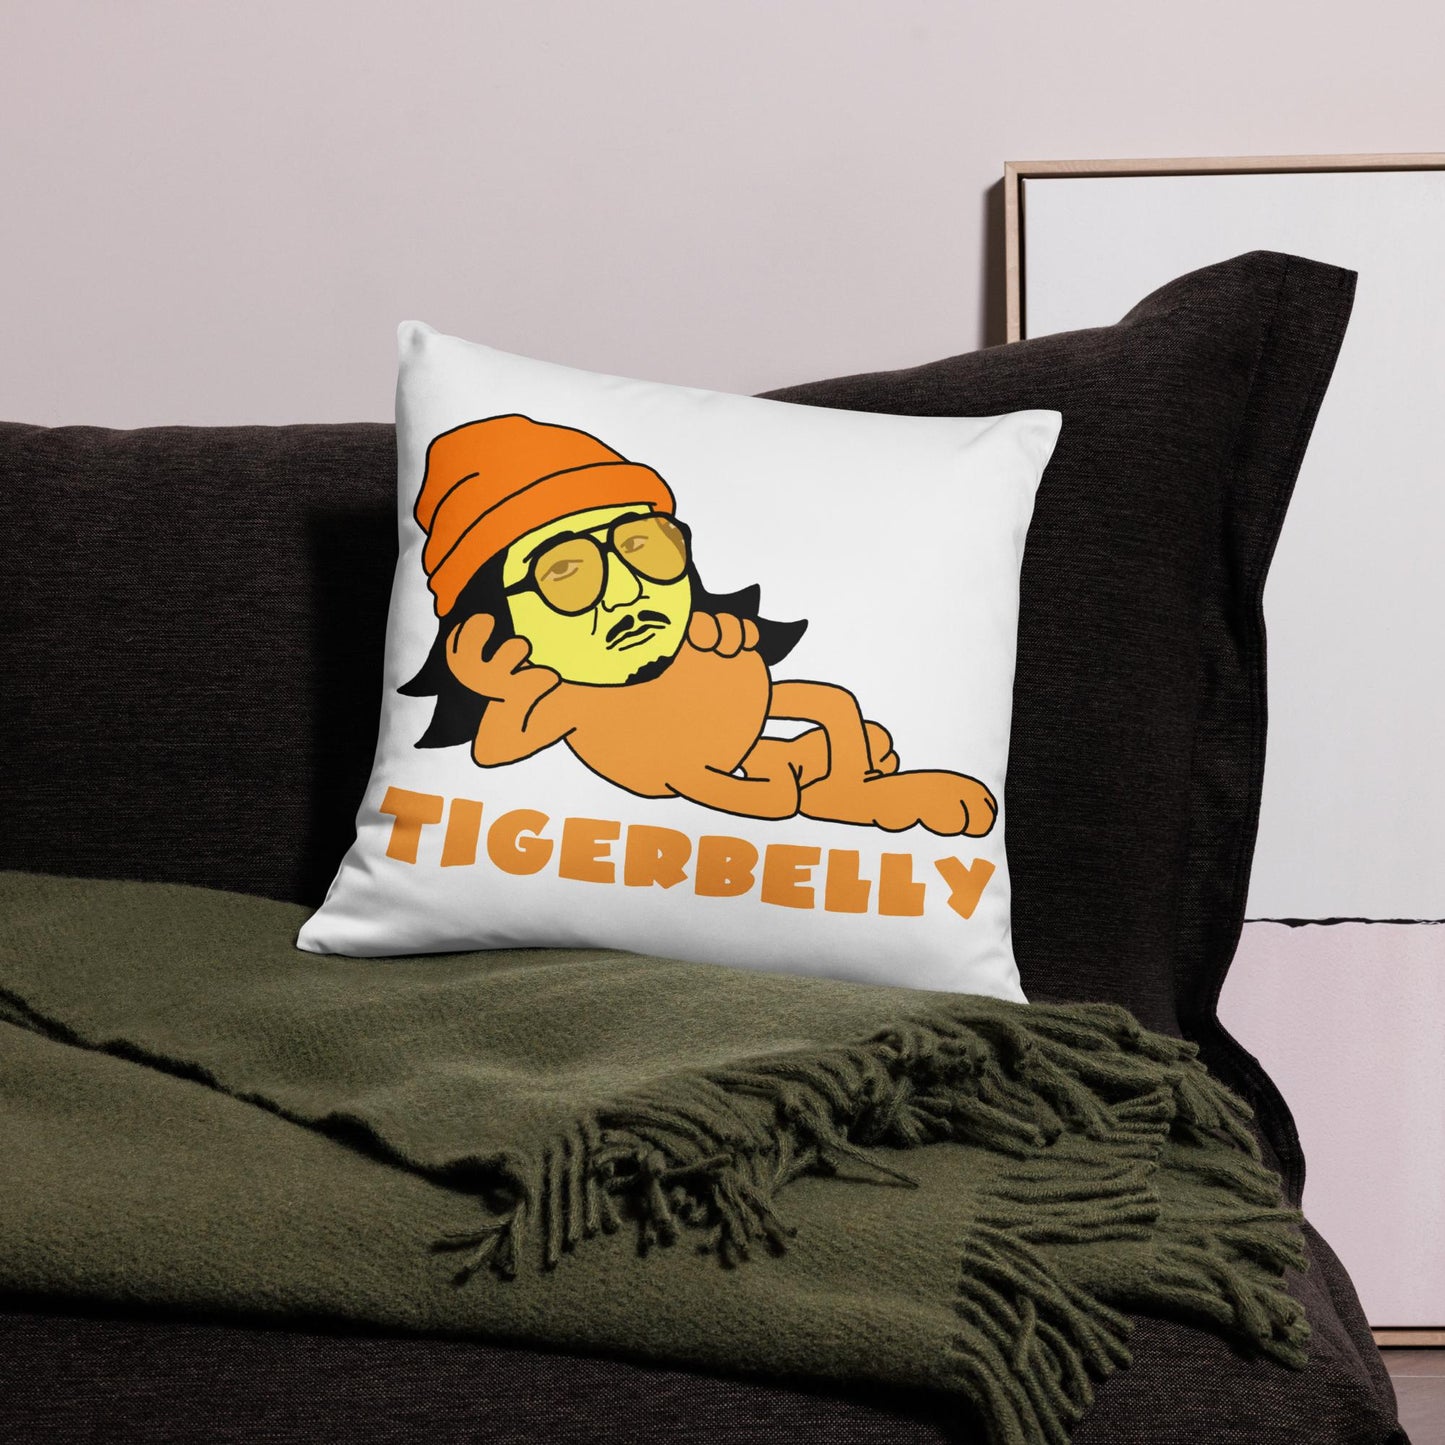 Bobby Lee Tigerbelly, Bobby Lee Merch, Tigerbelly Merch, Bobby Lee Gift, Funny Tigerbelly Gift, Tigerbelly Podcast, TigerBelly Pillow Next Cult Brand Bobby Lee, Podcasts, Stand-up Comedy, TigerBelly